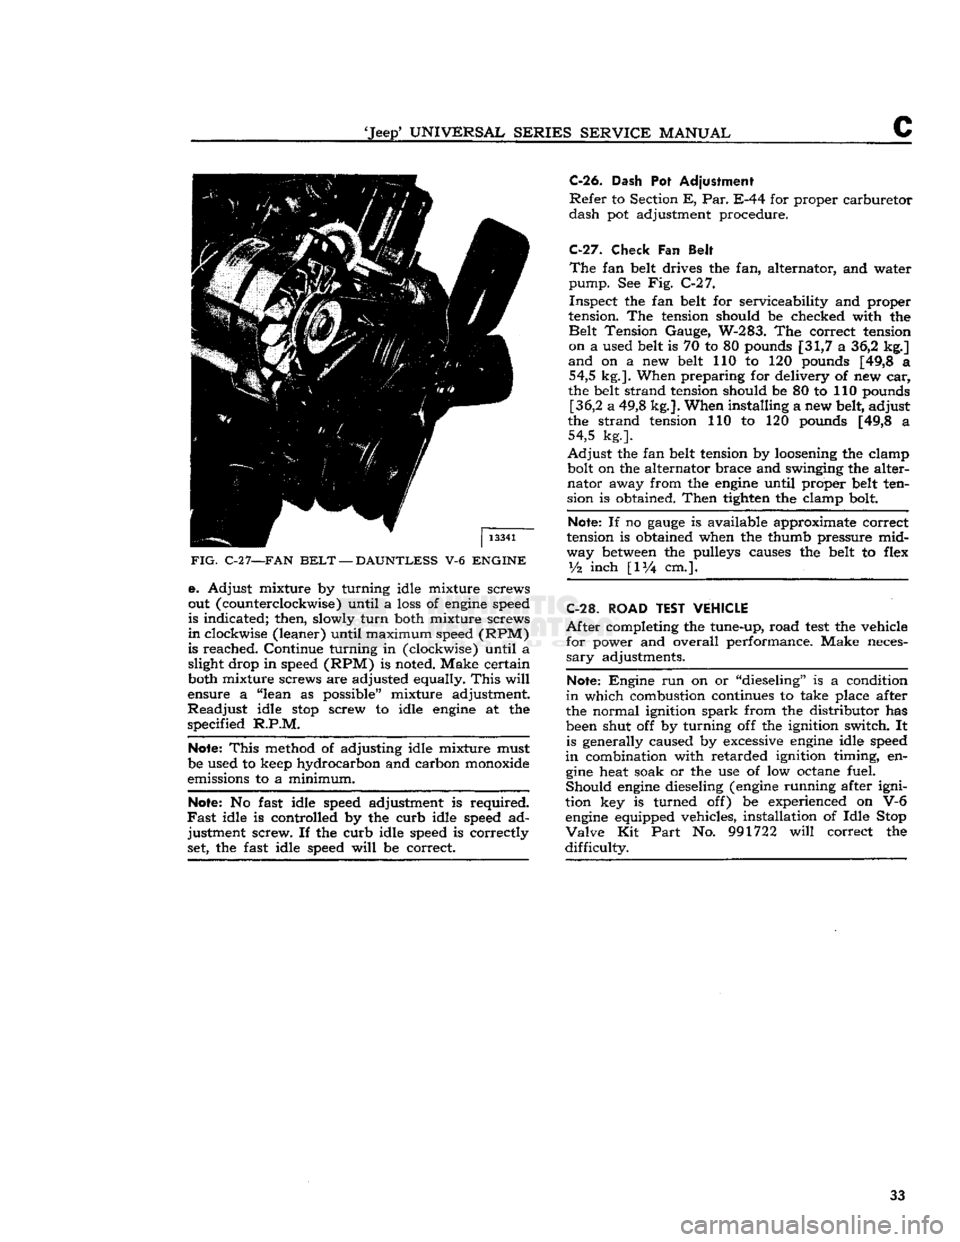 JEEP DJ 1953  Service Manual 
Jeep*
 UNIVERSAL
 SERIES
 SERVICE
 MANUAL 

C 

FIG.
 C-2
 7—FAN
 BELT
 —
 DAUNTLESS
 V-6
 ENGINE 
 e. Adjust mixture by turning idle mixture screws 
out (counterclockwise) until a loss of engin